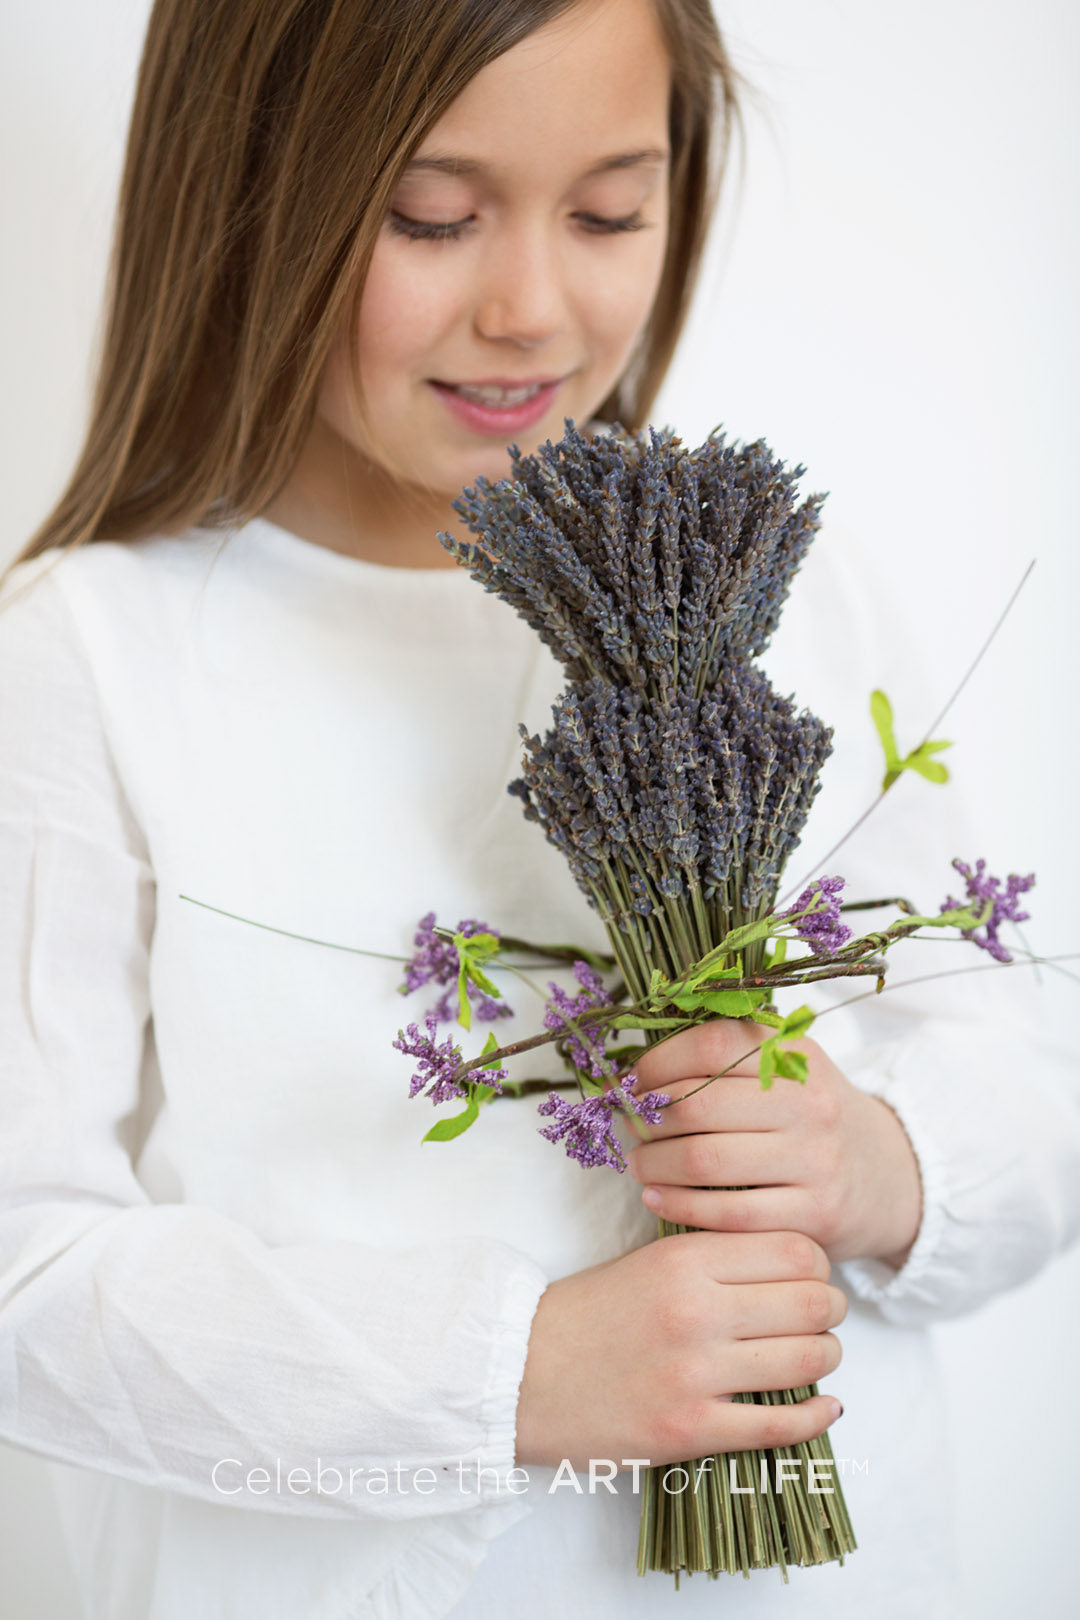 Top four essential oils for kids. Lavender is one of my favourite essential oils for kids because of it's many uses.